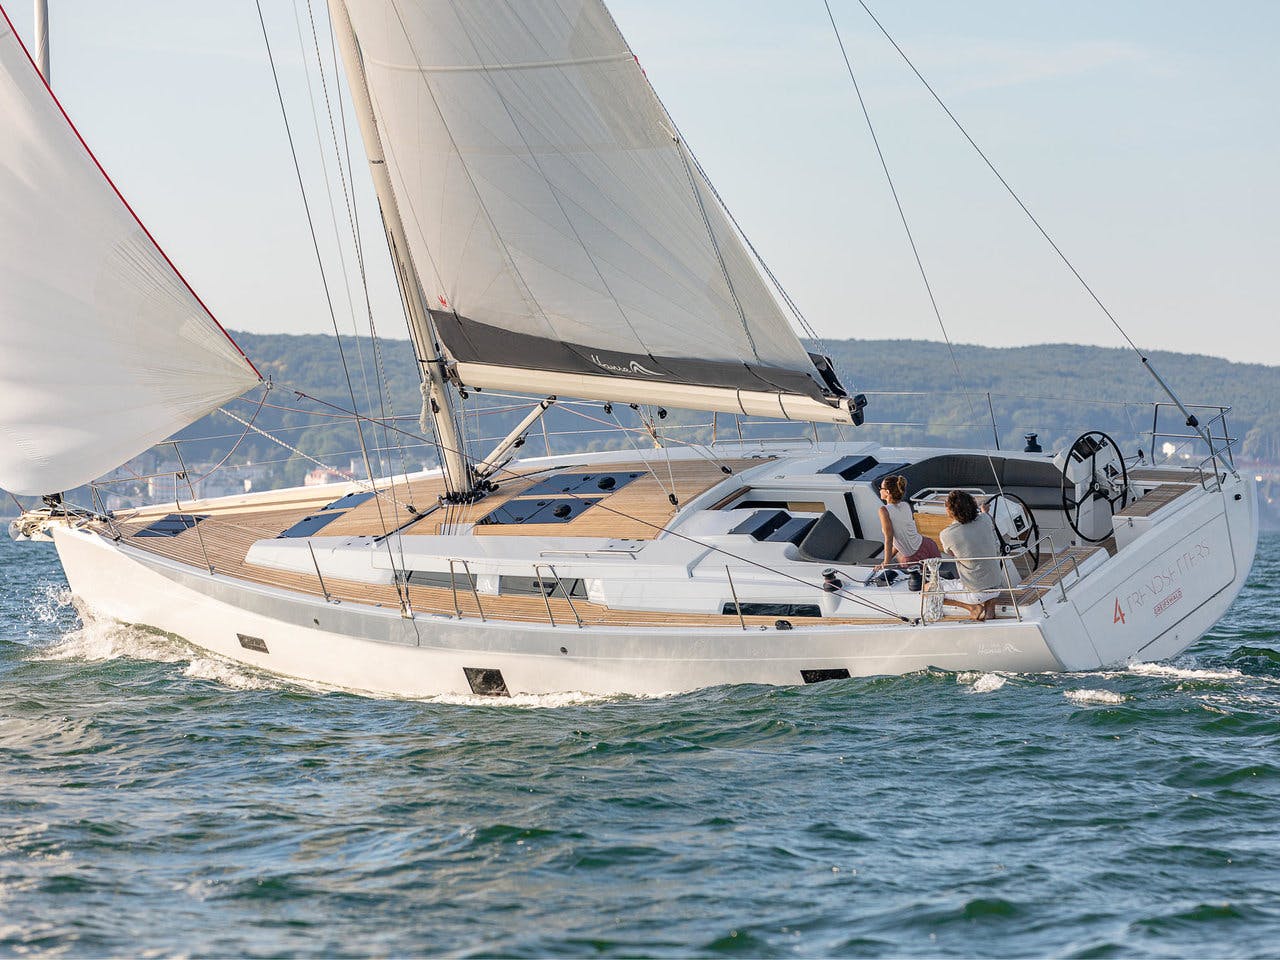 Book Hanse 458 Sailing yacht for bareboat charter in Marina di Scarlino - Follonica, Tuscany, Italy with TripYacht!, picture 1